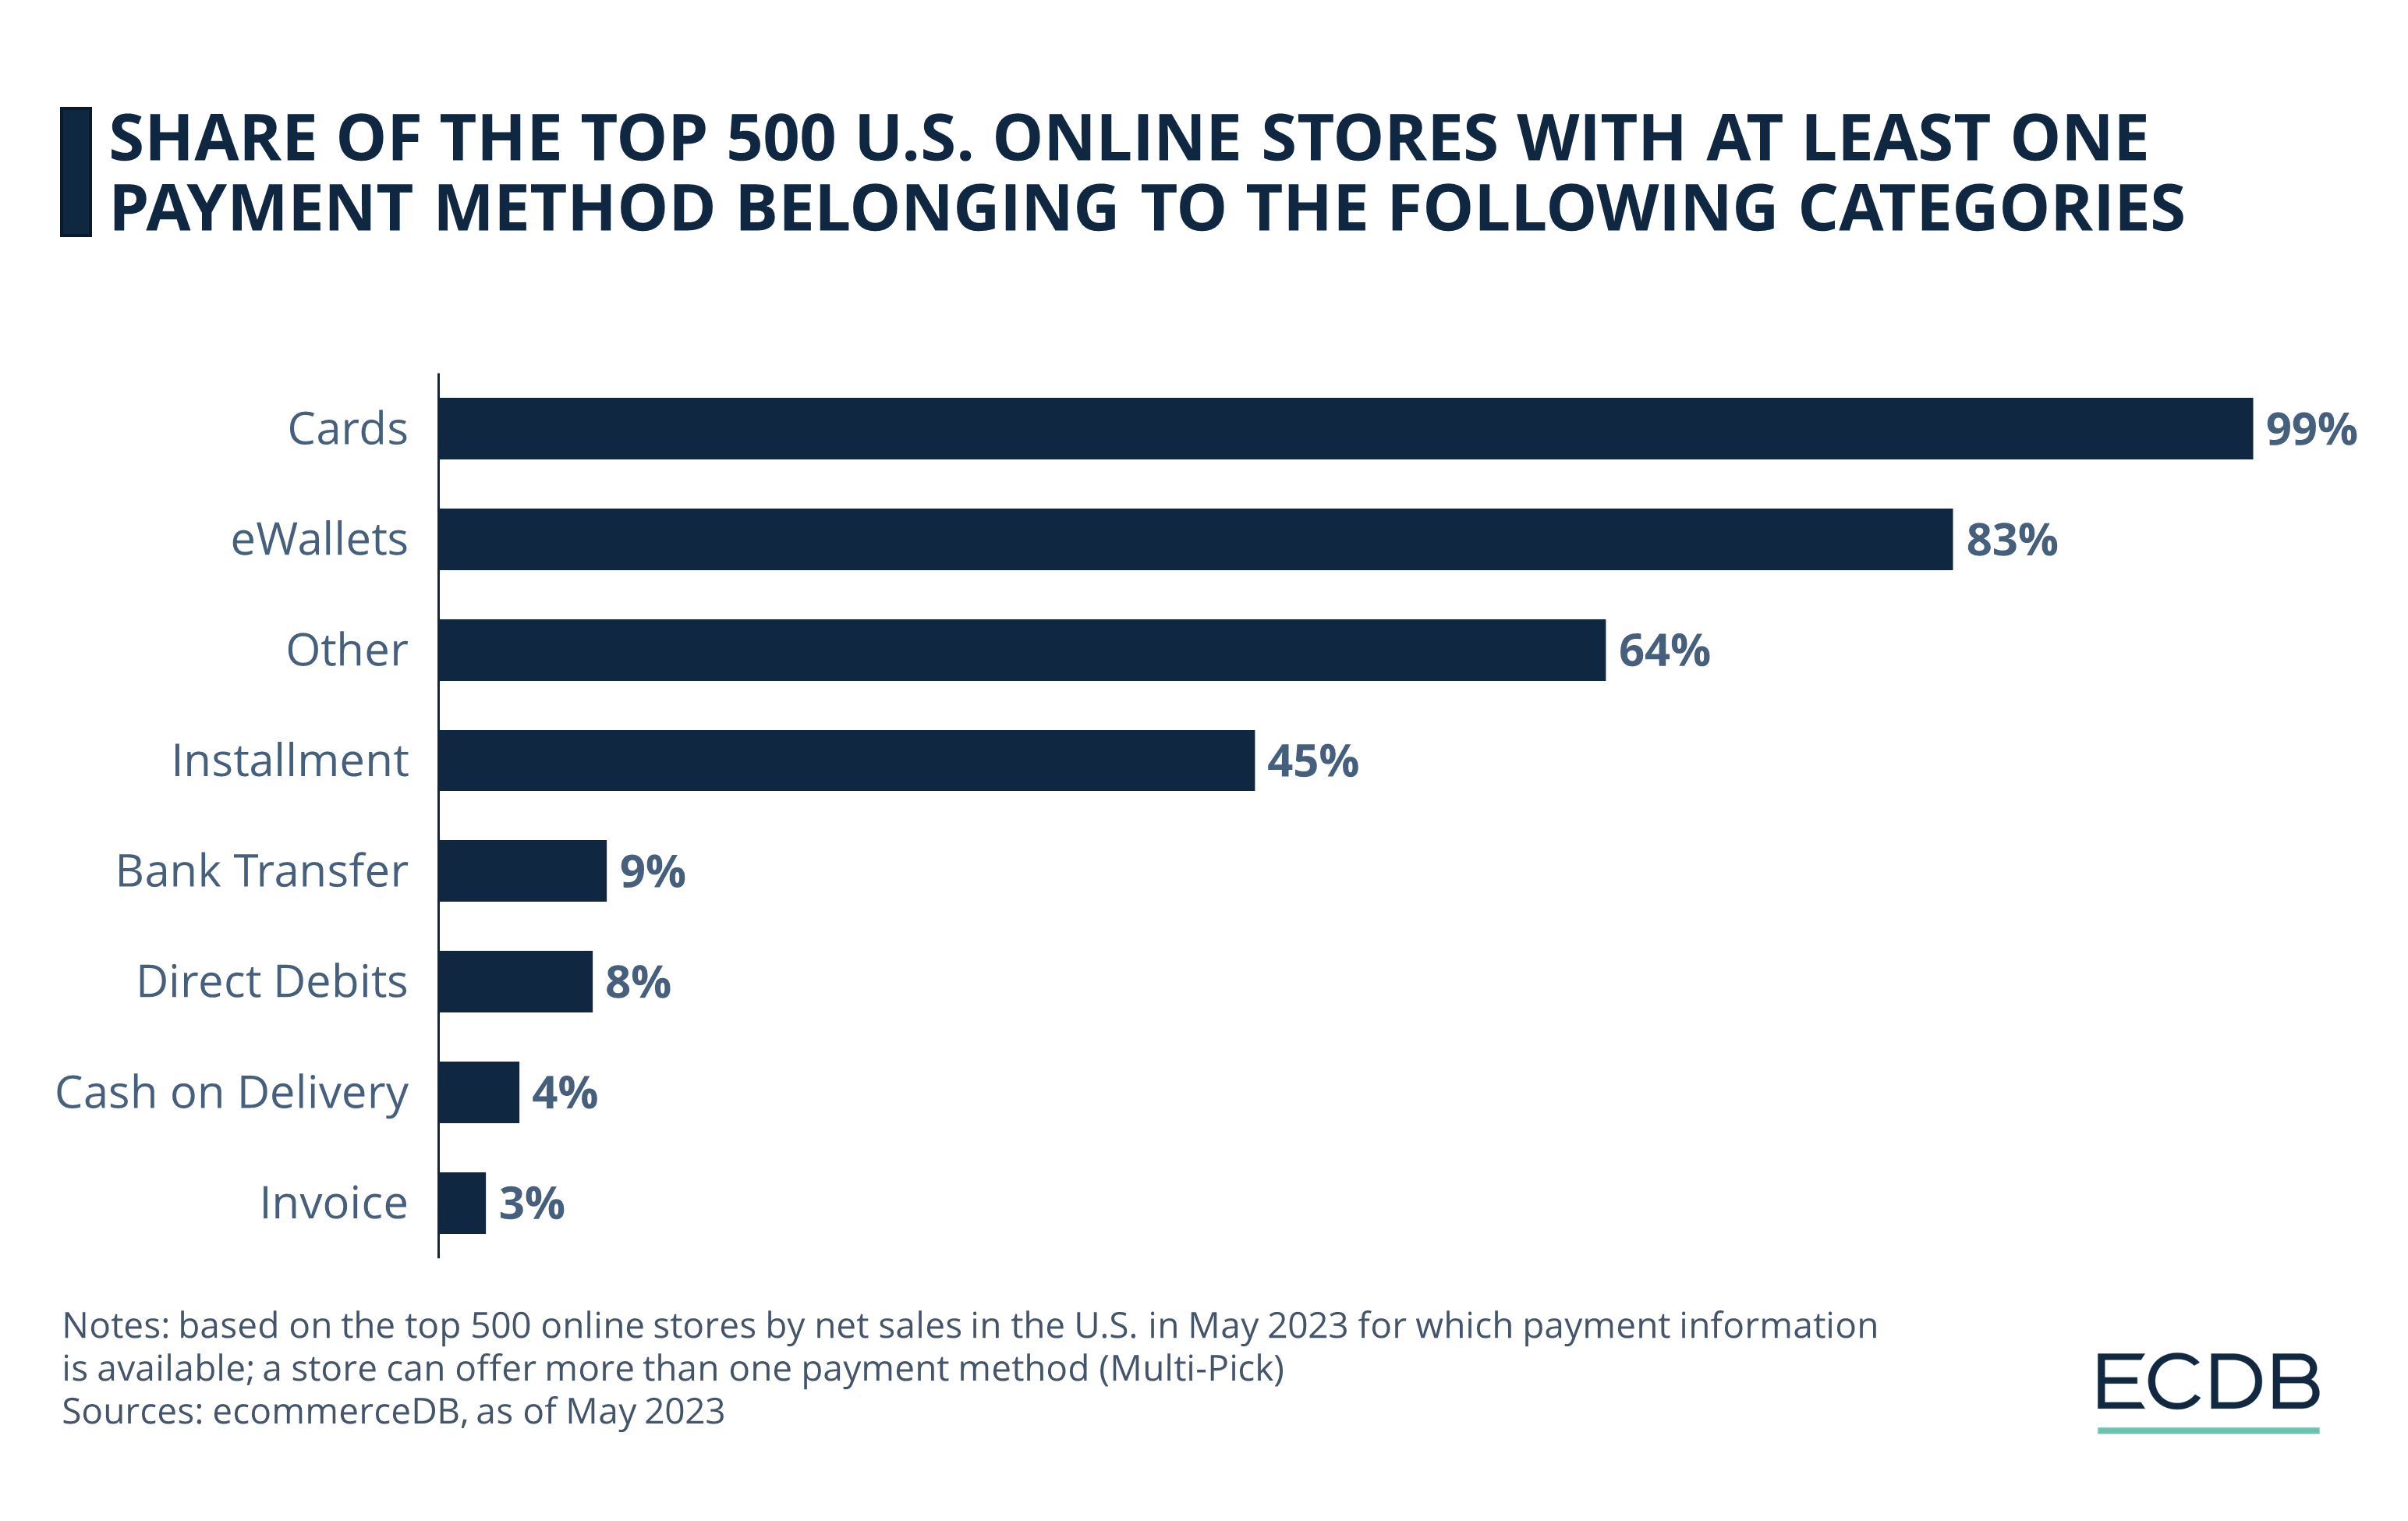 Share of the Top 500 US Online Stores with at Least One Payment Method Belonging to the Following Categories